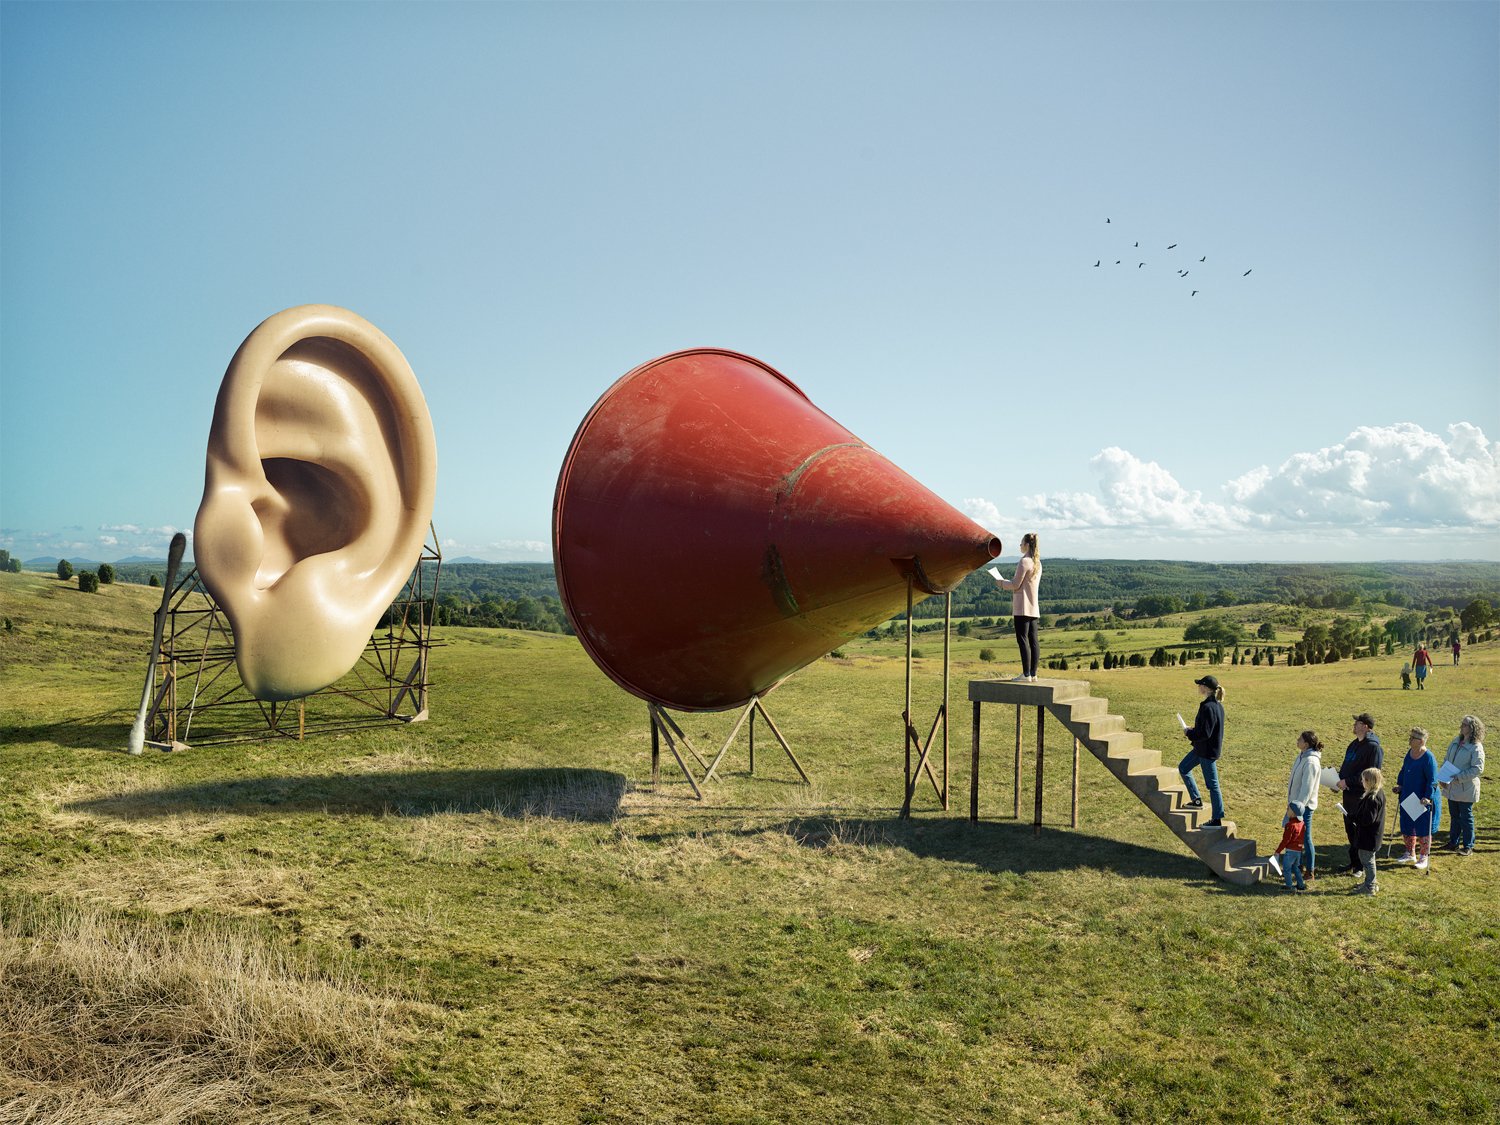 YOUR OPINION IS IMPORTANT TO US - Erik Johansson